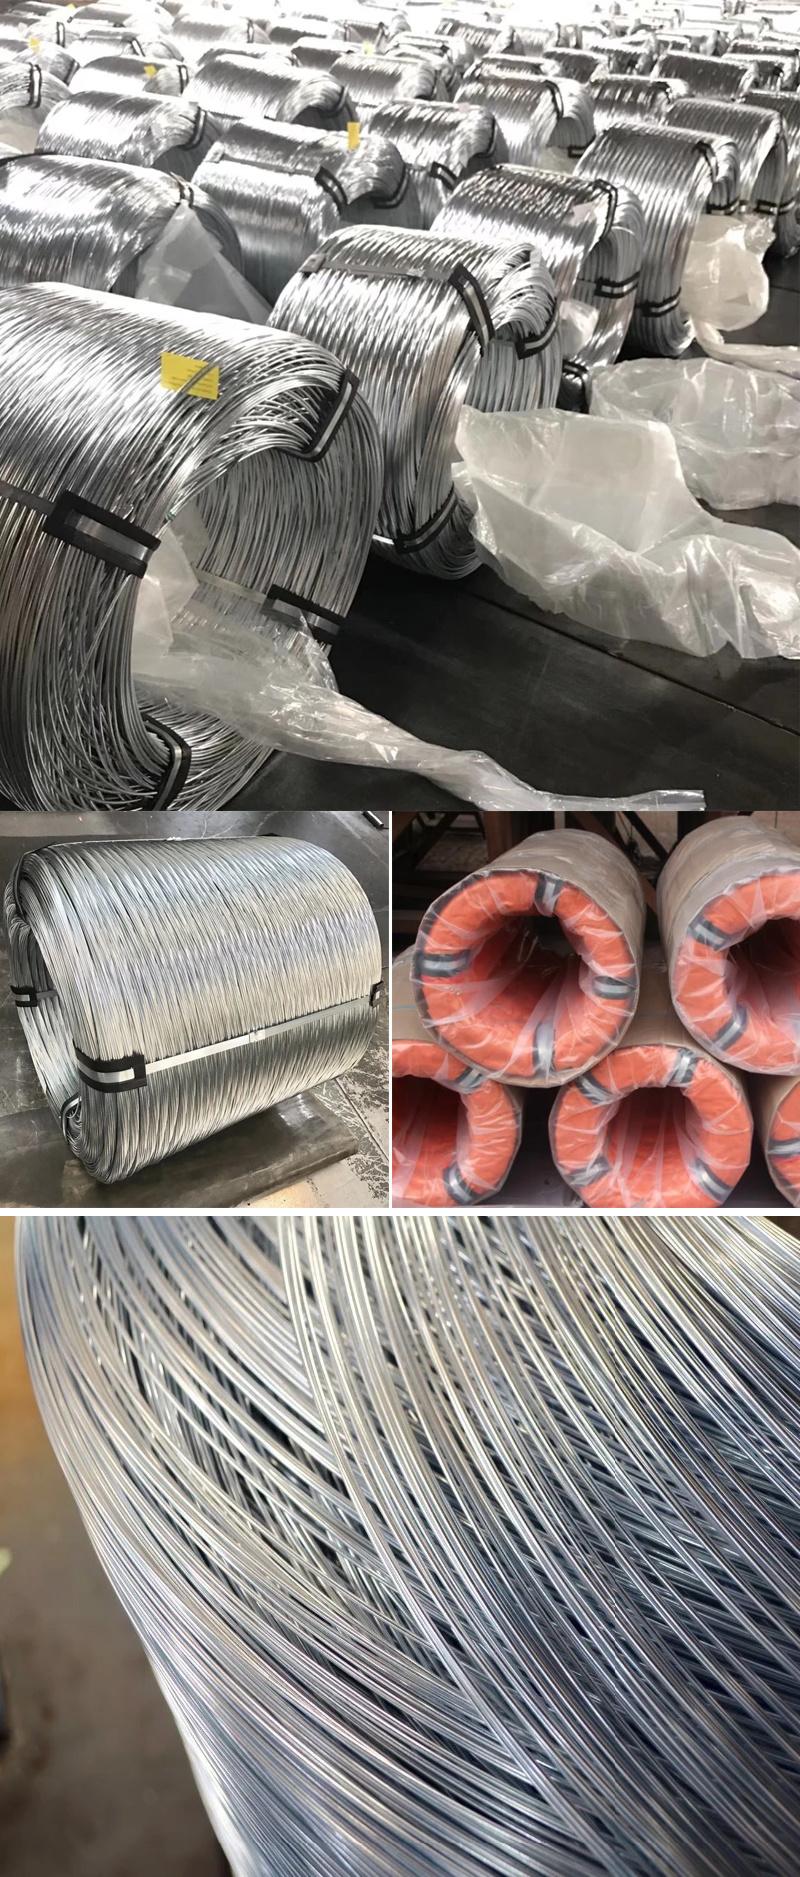 Factory Price Spring Steel Wire for Mattress